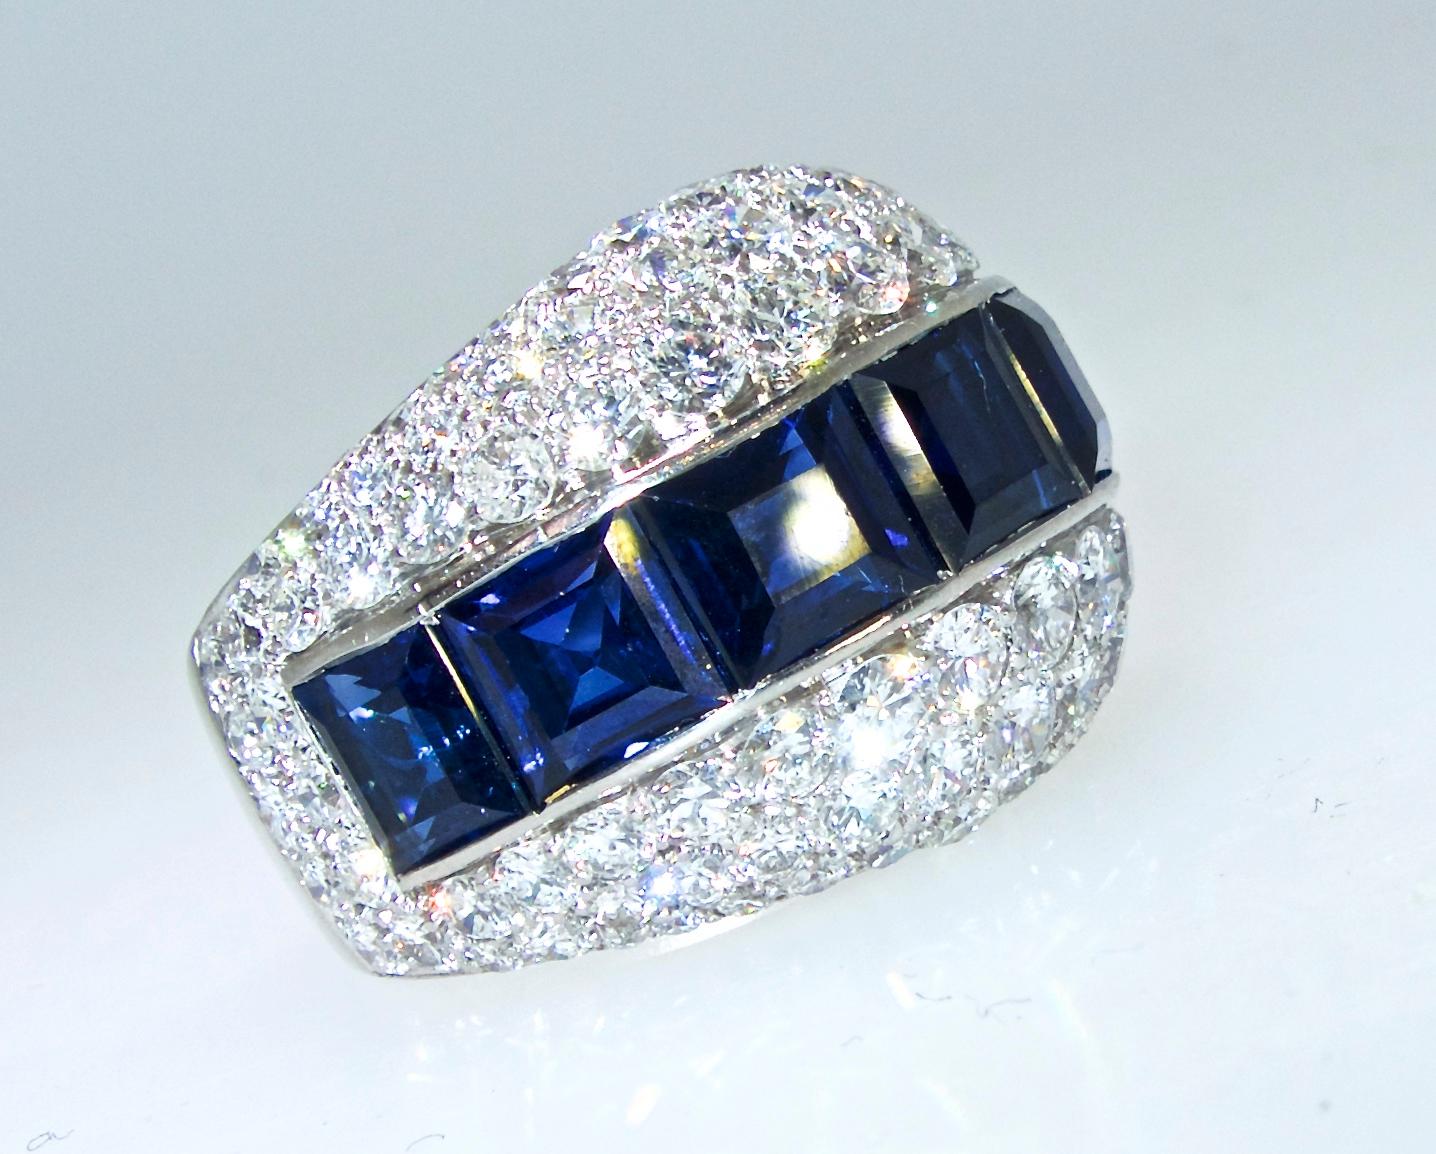 Platinum vintage Bulgari ring possessing fine natural bright blue sapphires.  Set girdle to girdle, the 7 well matched fine natural vivid blue sapphires weigh approximately 8.76 cts.  Accenting these center stones are fine white round brilliant cut